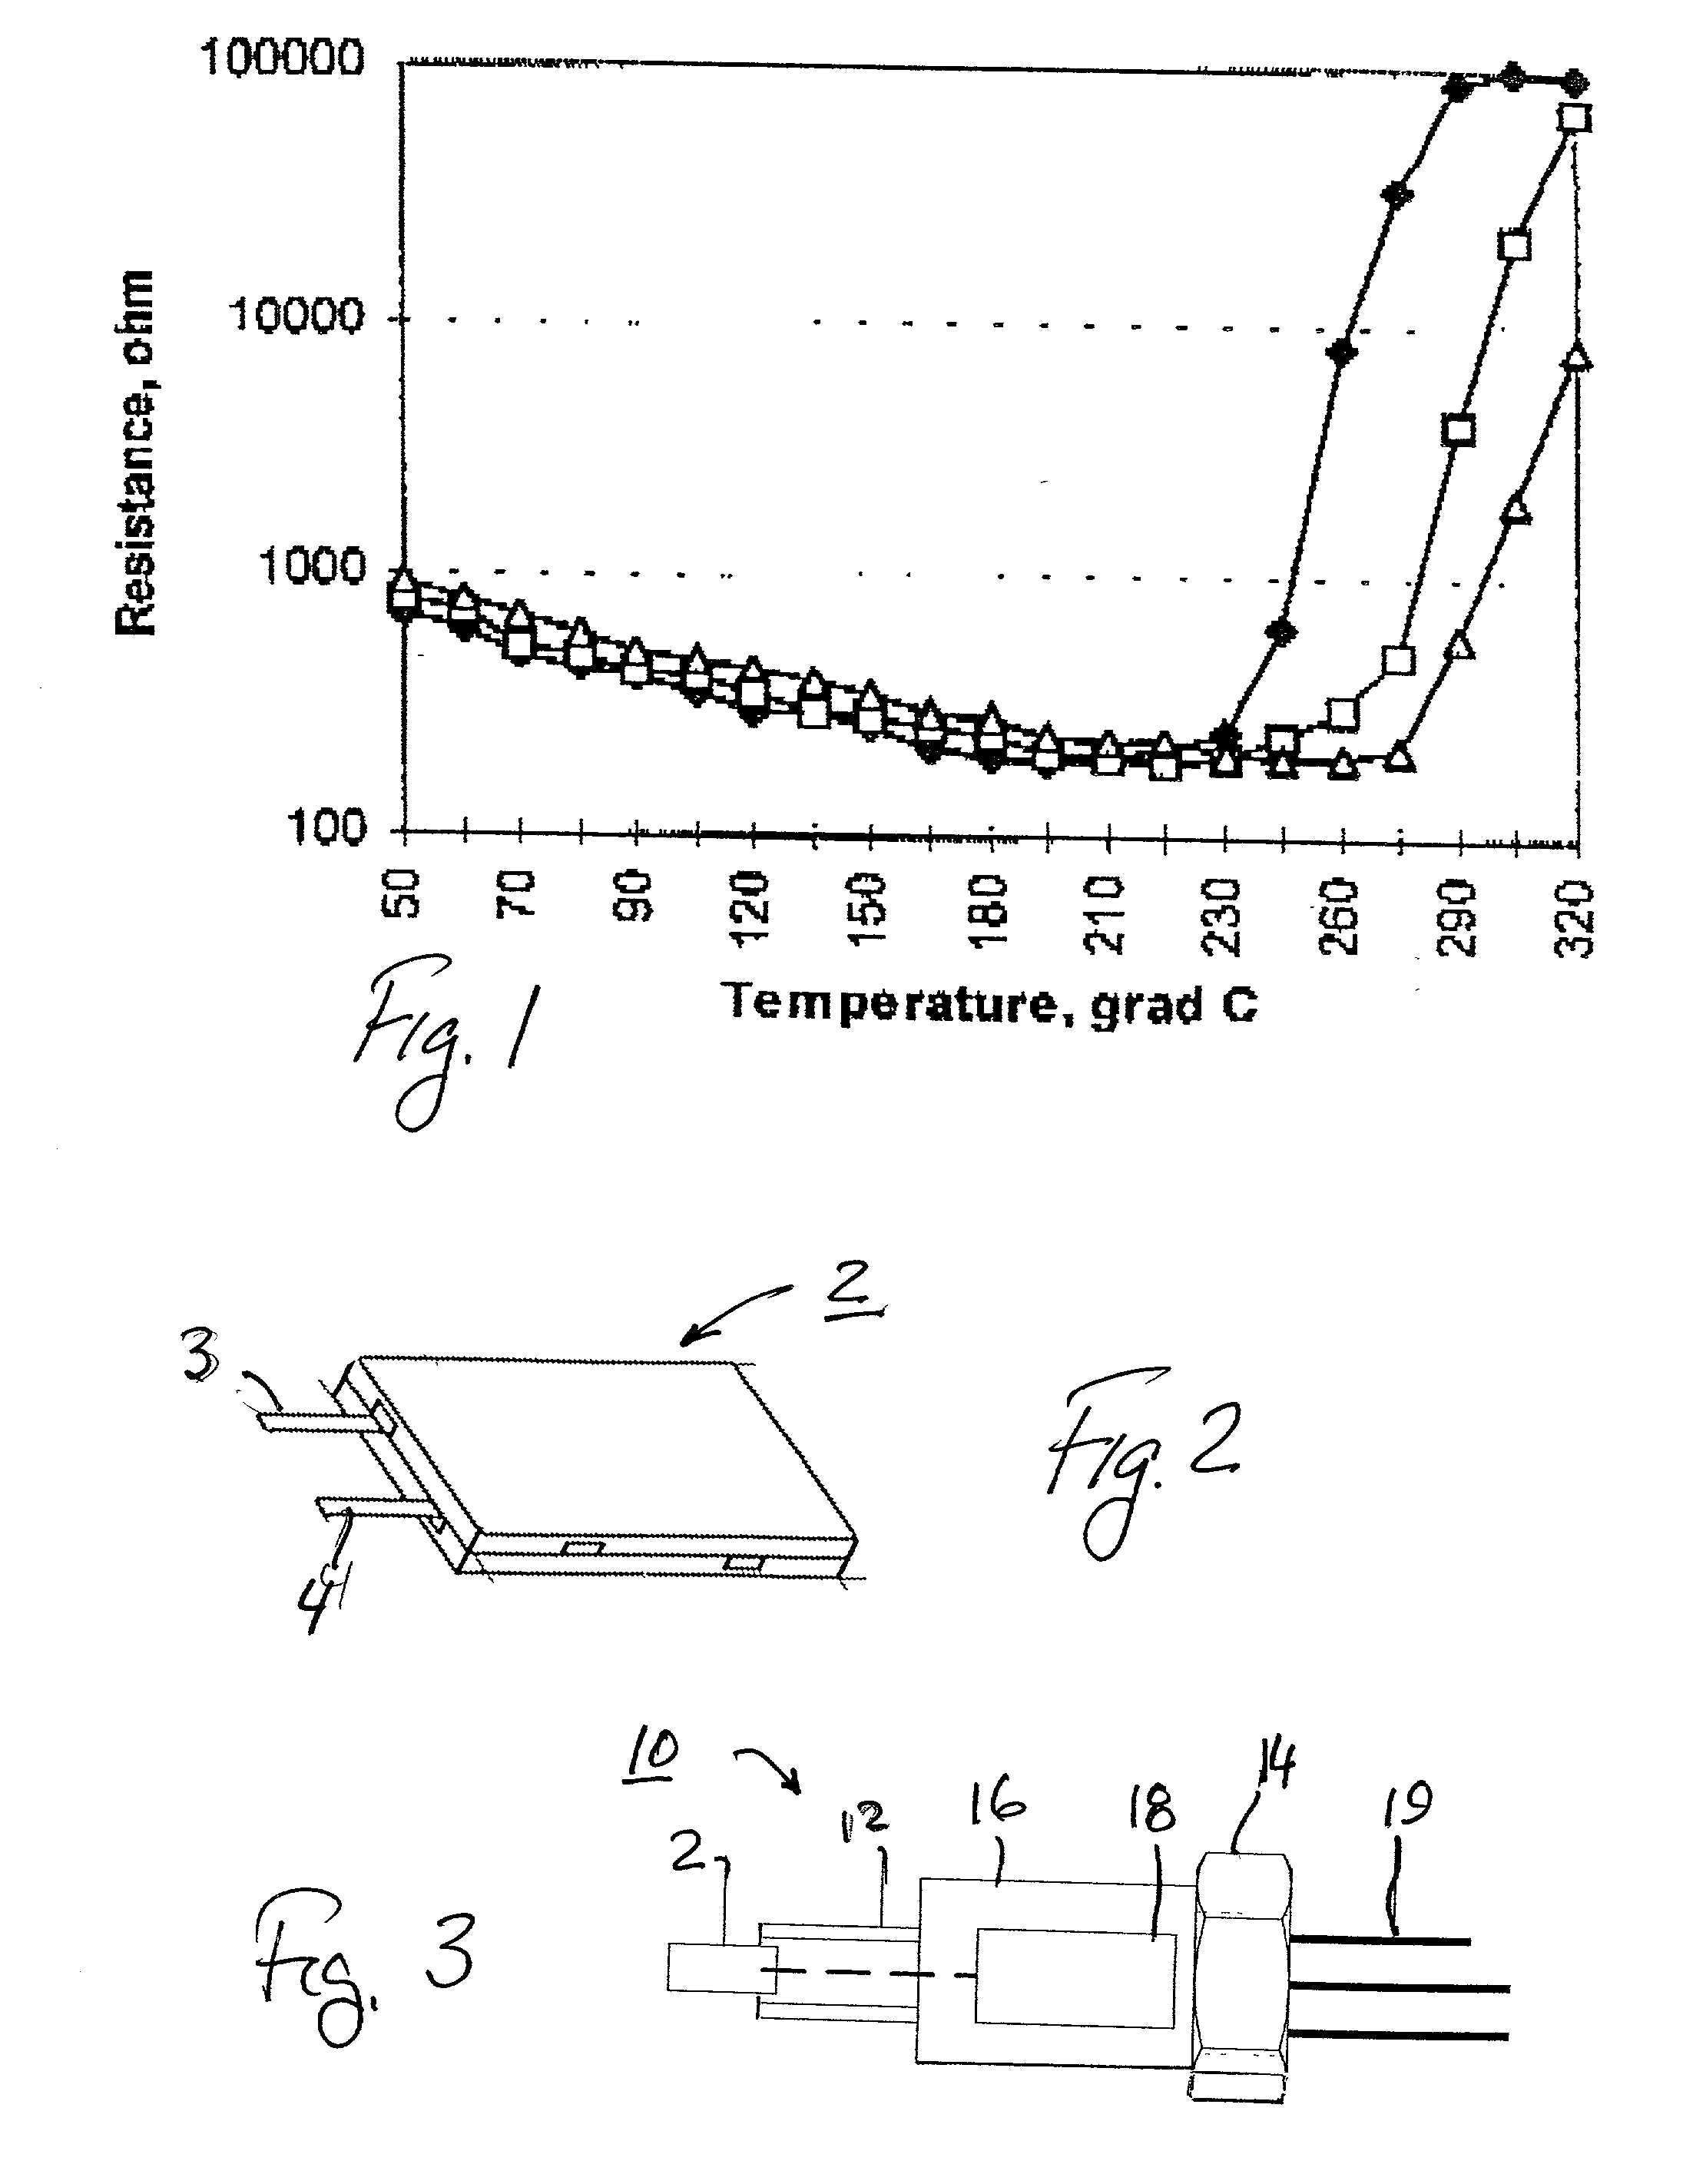 Method and apparatus for providing an indication of the composition of a fluid particularly useful in heat pumps and vaporizers